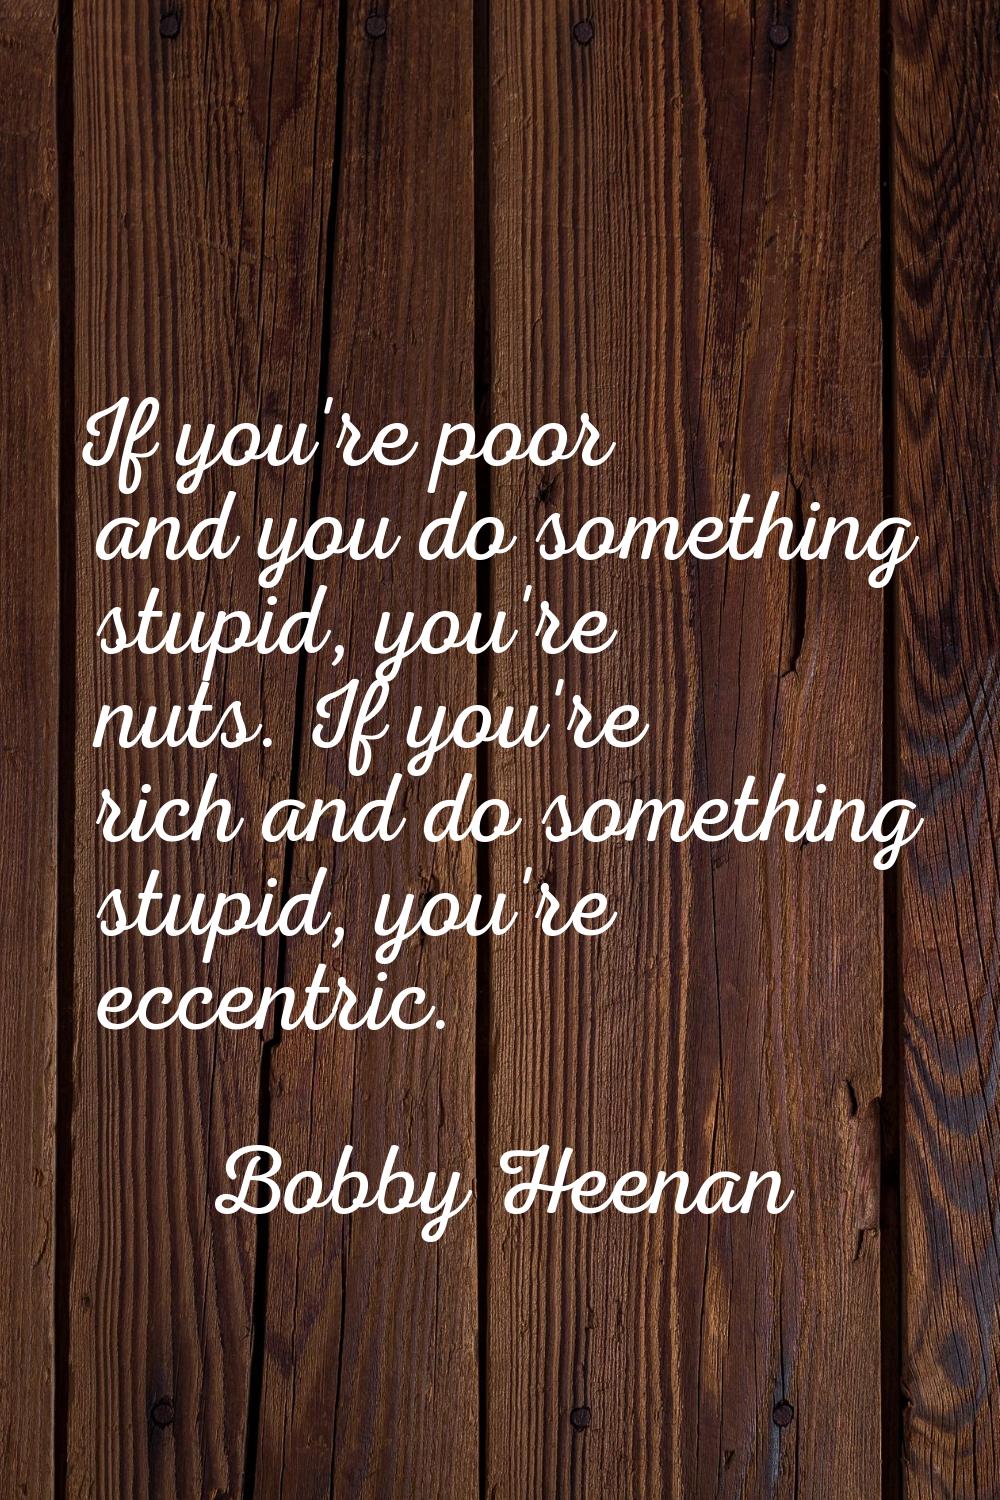 If you're poor and you do something stupid, you're nuts. If you're rich and do something stupid, yo